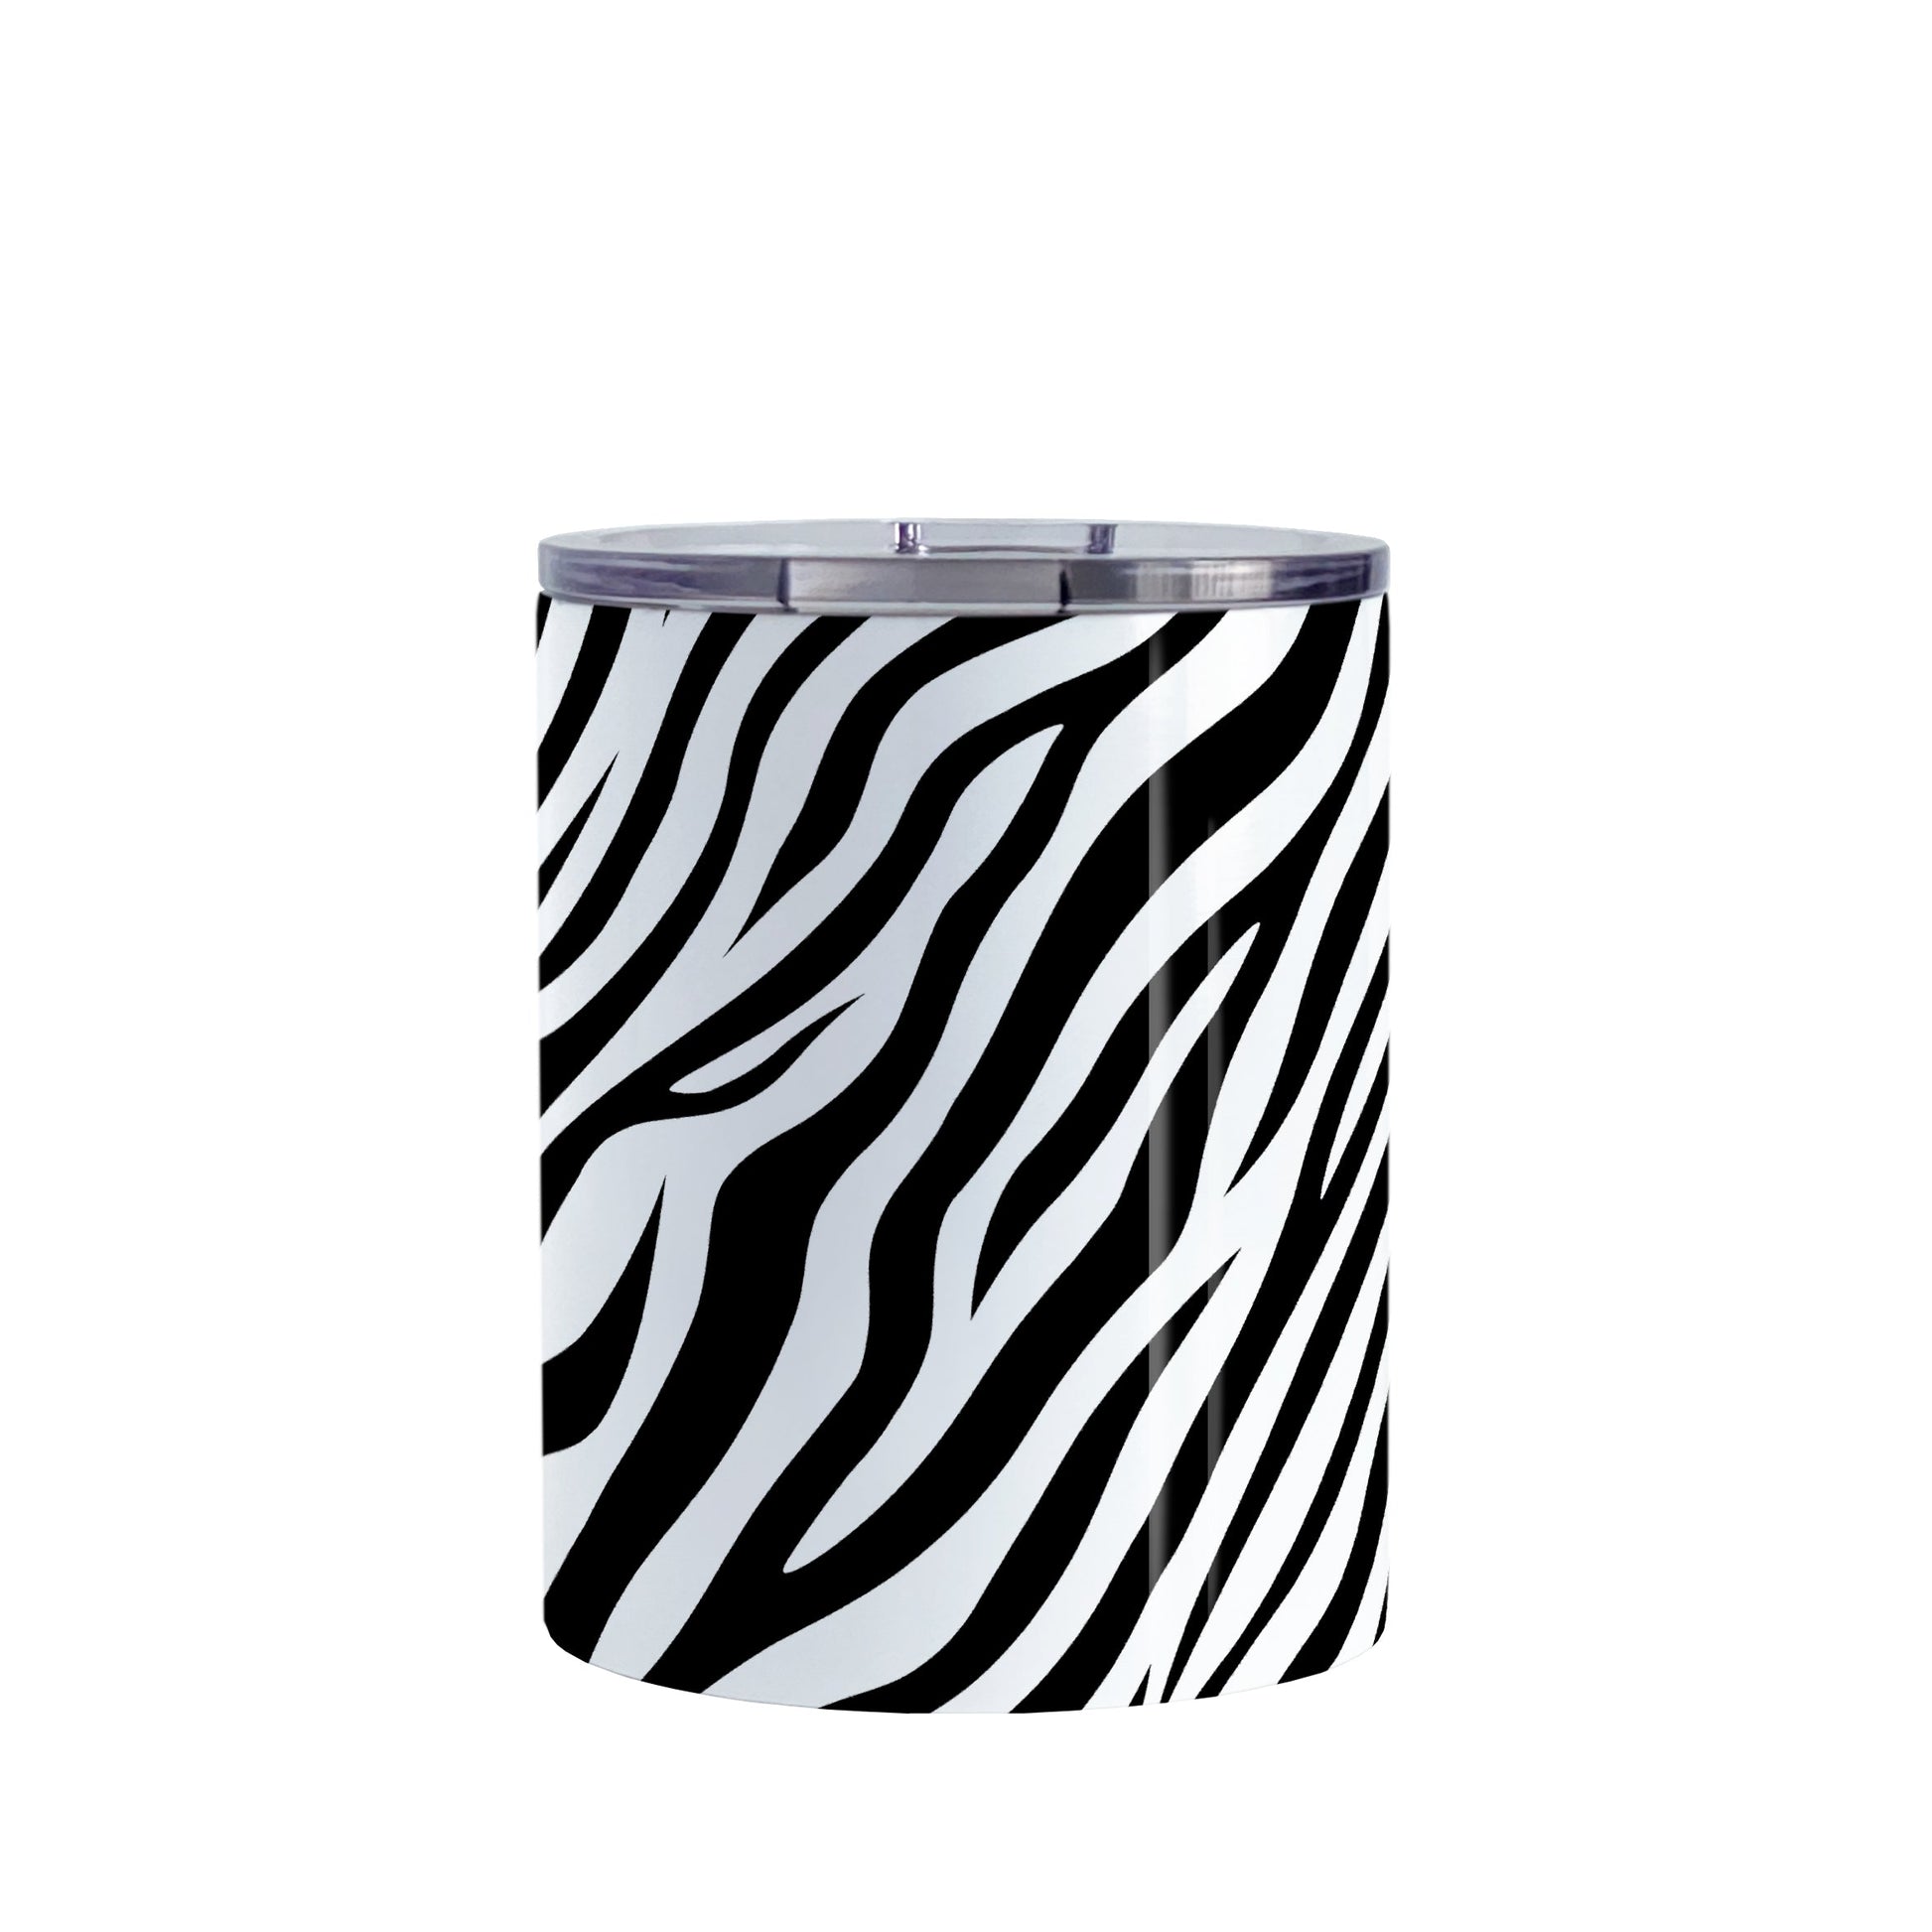 Zebra Print Pattern Tumbler Cup (10oz, stainless steel insulated) at Amy's Coffee Mugs